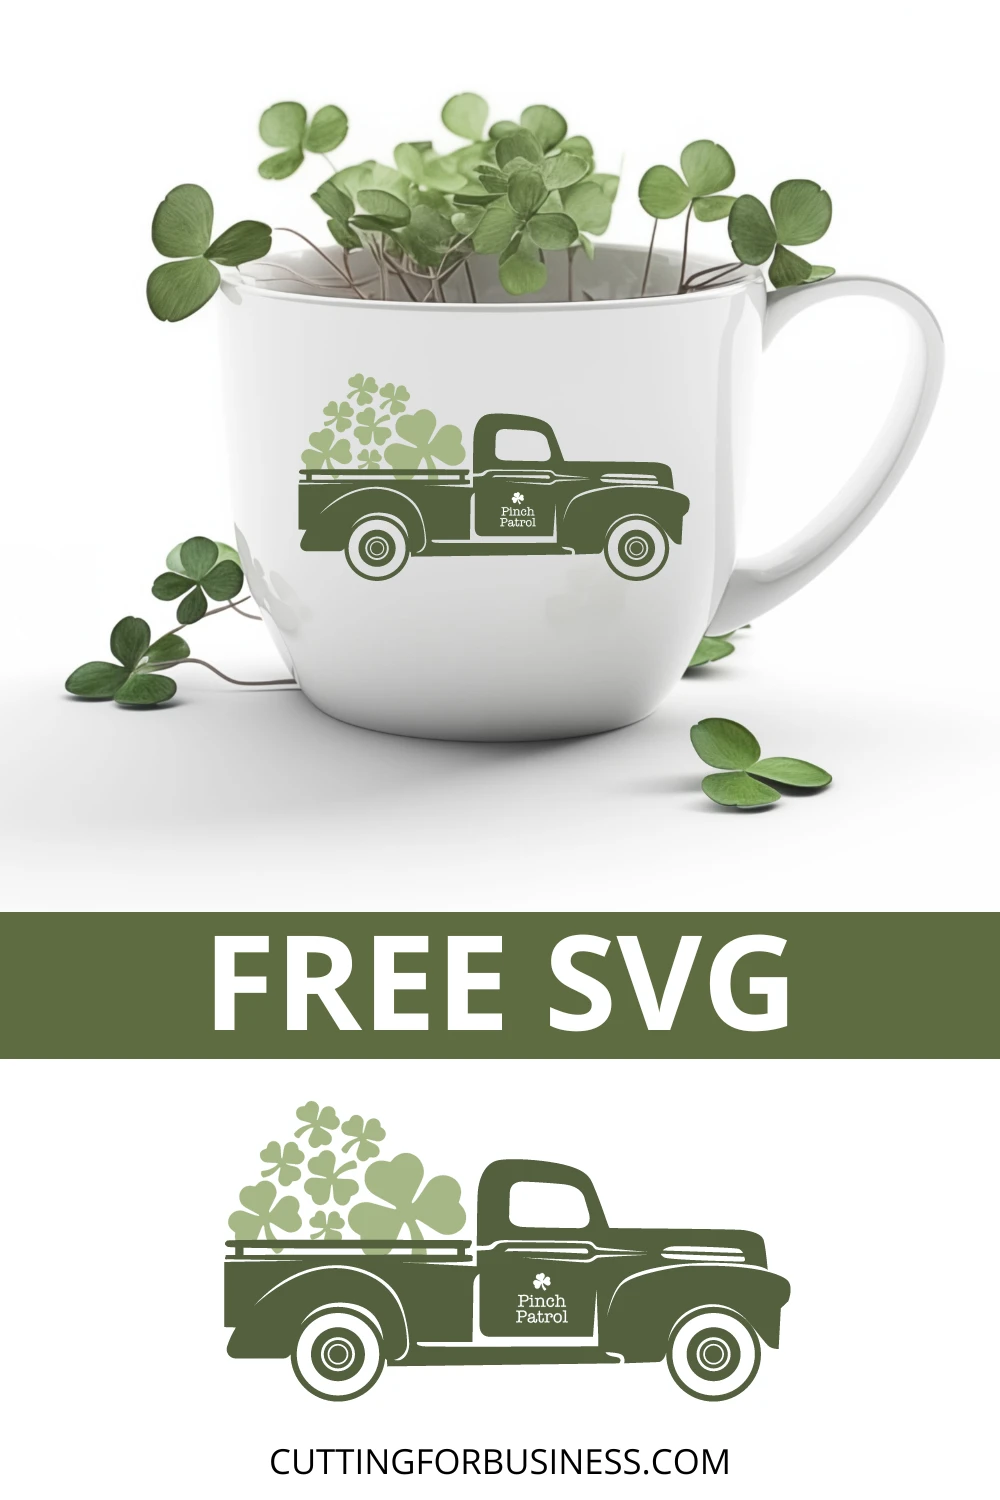 Free St. Patrick's Day Red Truck Filler SVG - cuttingforbusiness.com